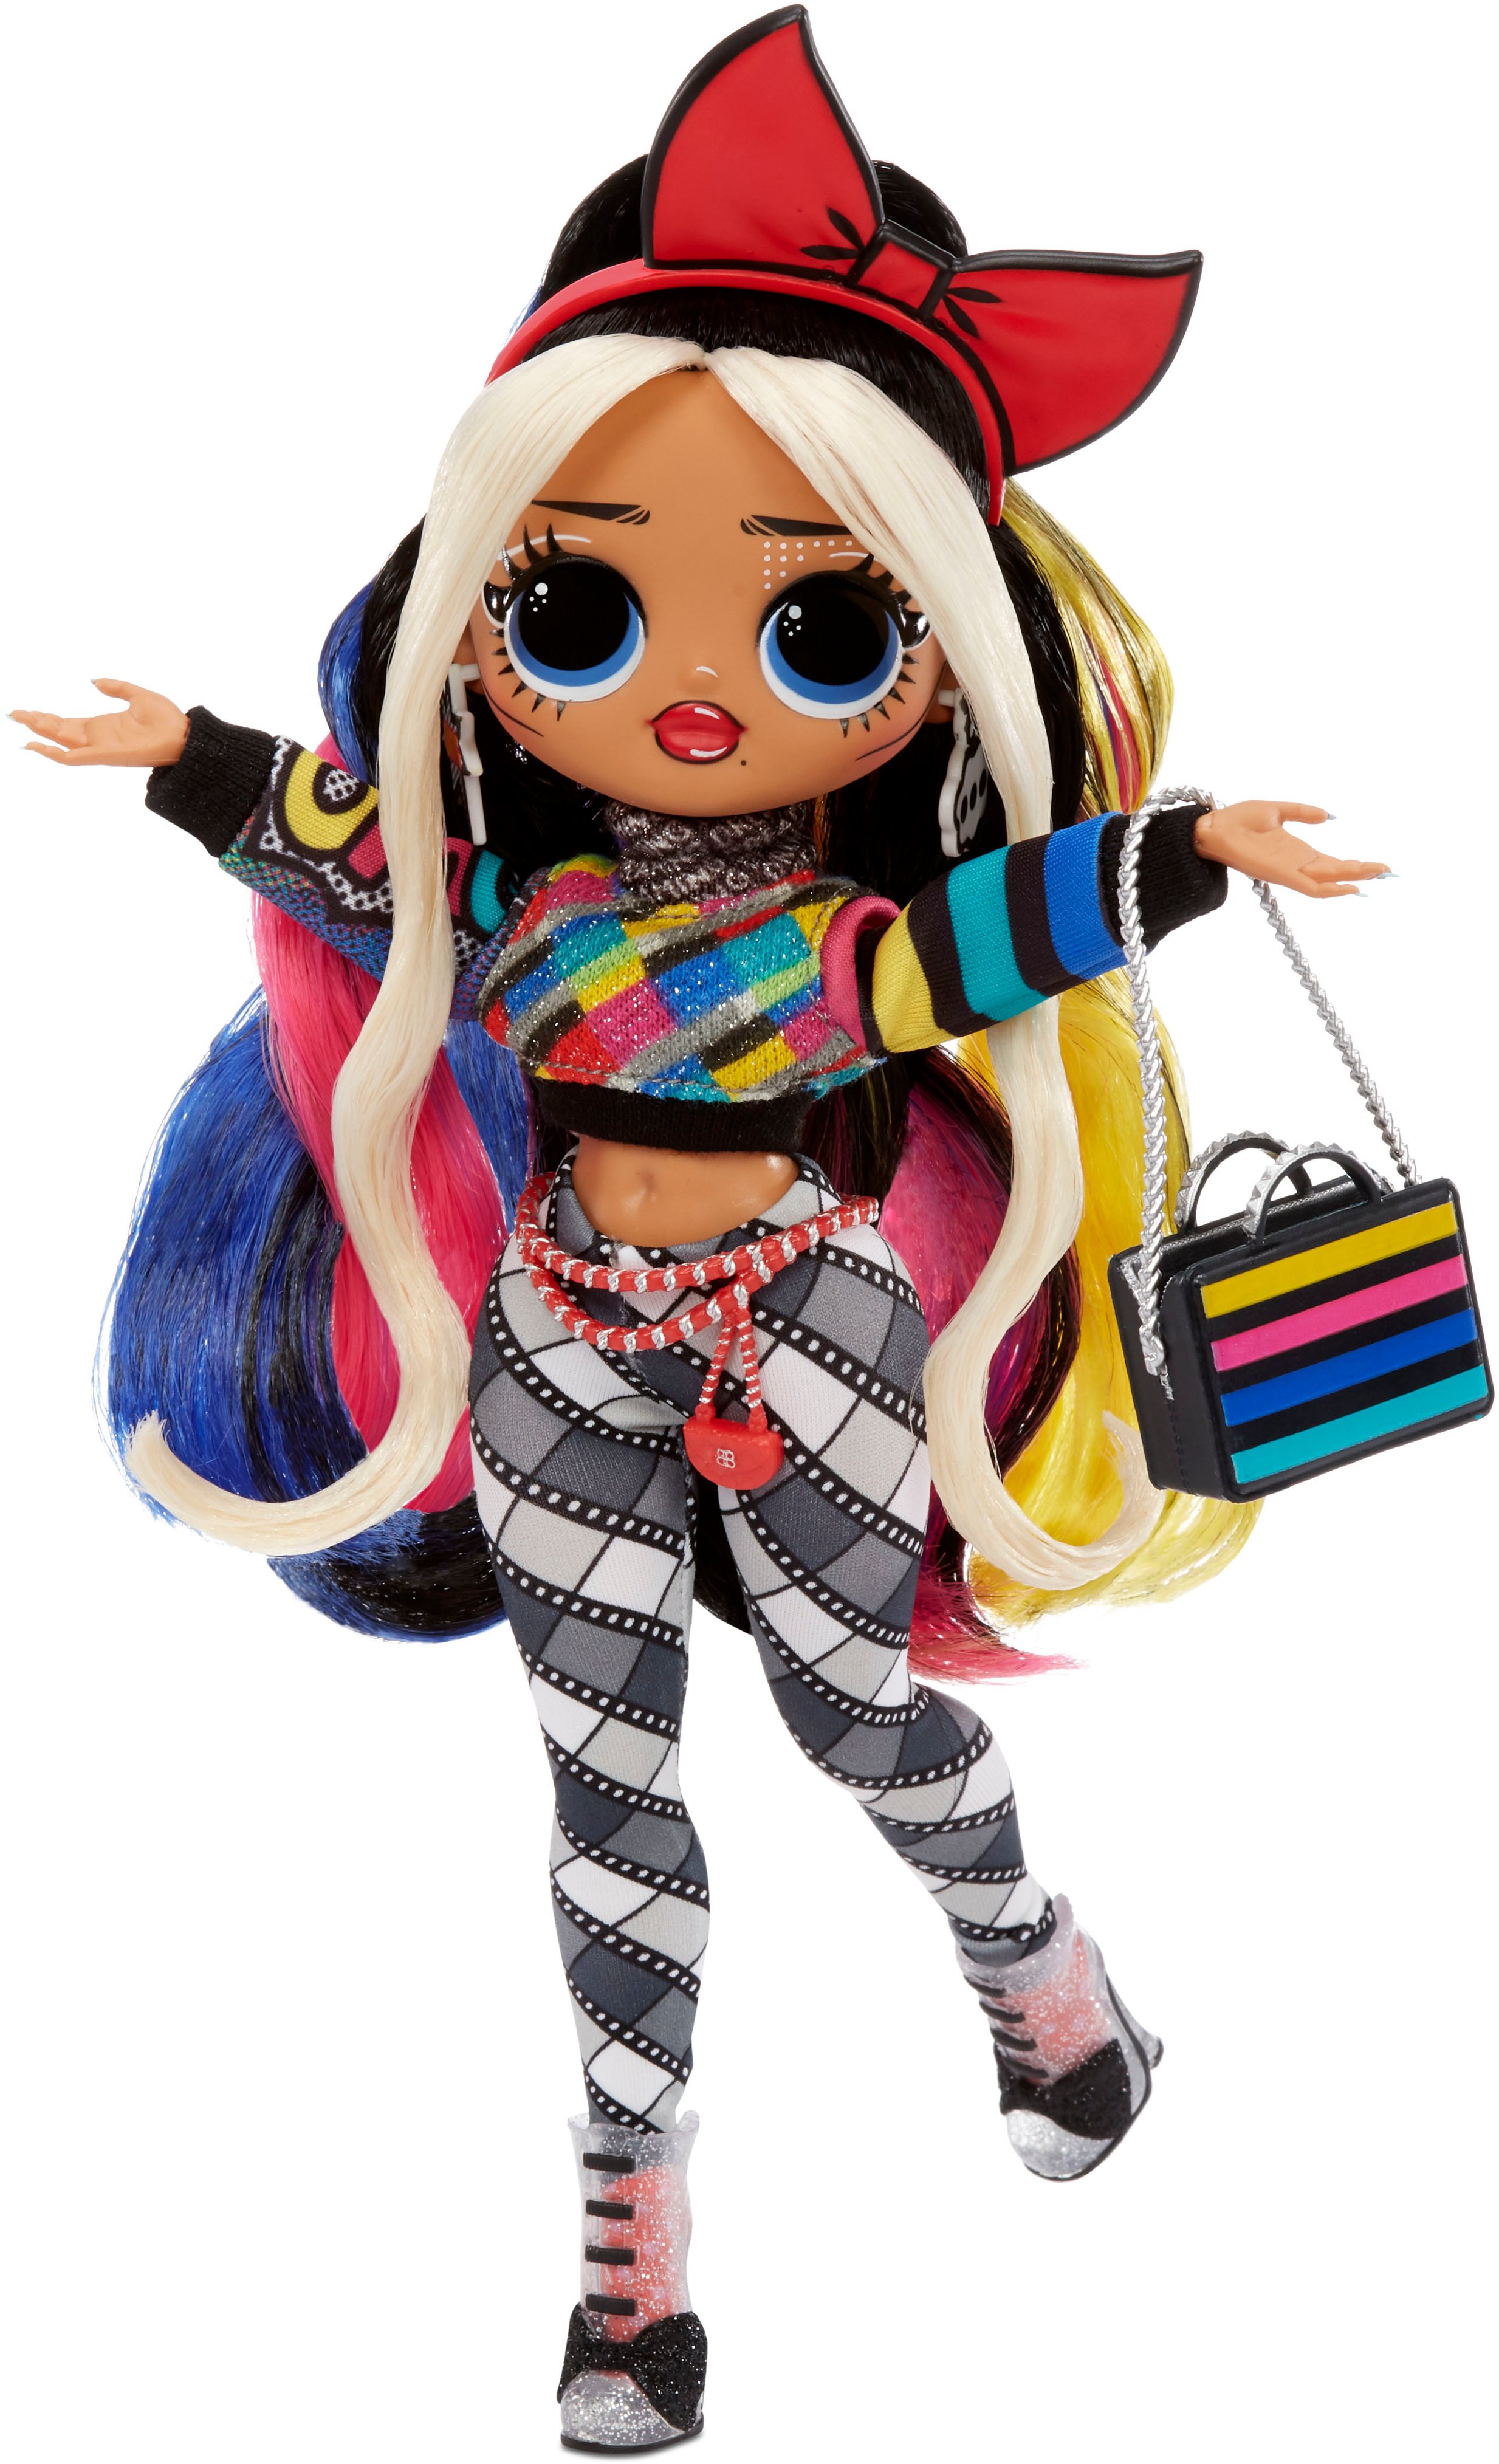 Angle View: LOL Surprise OMG Movie Magic™ Starlette Fashion Doll With 25 Surprises Including 2 Fashion Outfits, 3D Glasses, Movie Playset - Toys for Girls Ages 4 5 6+